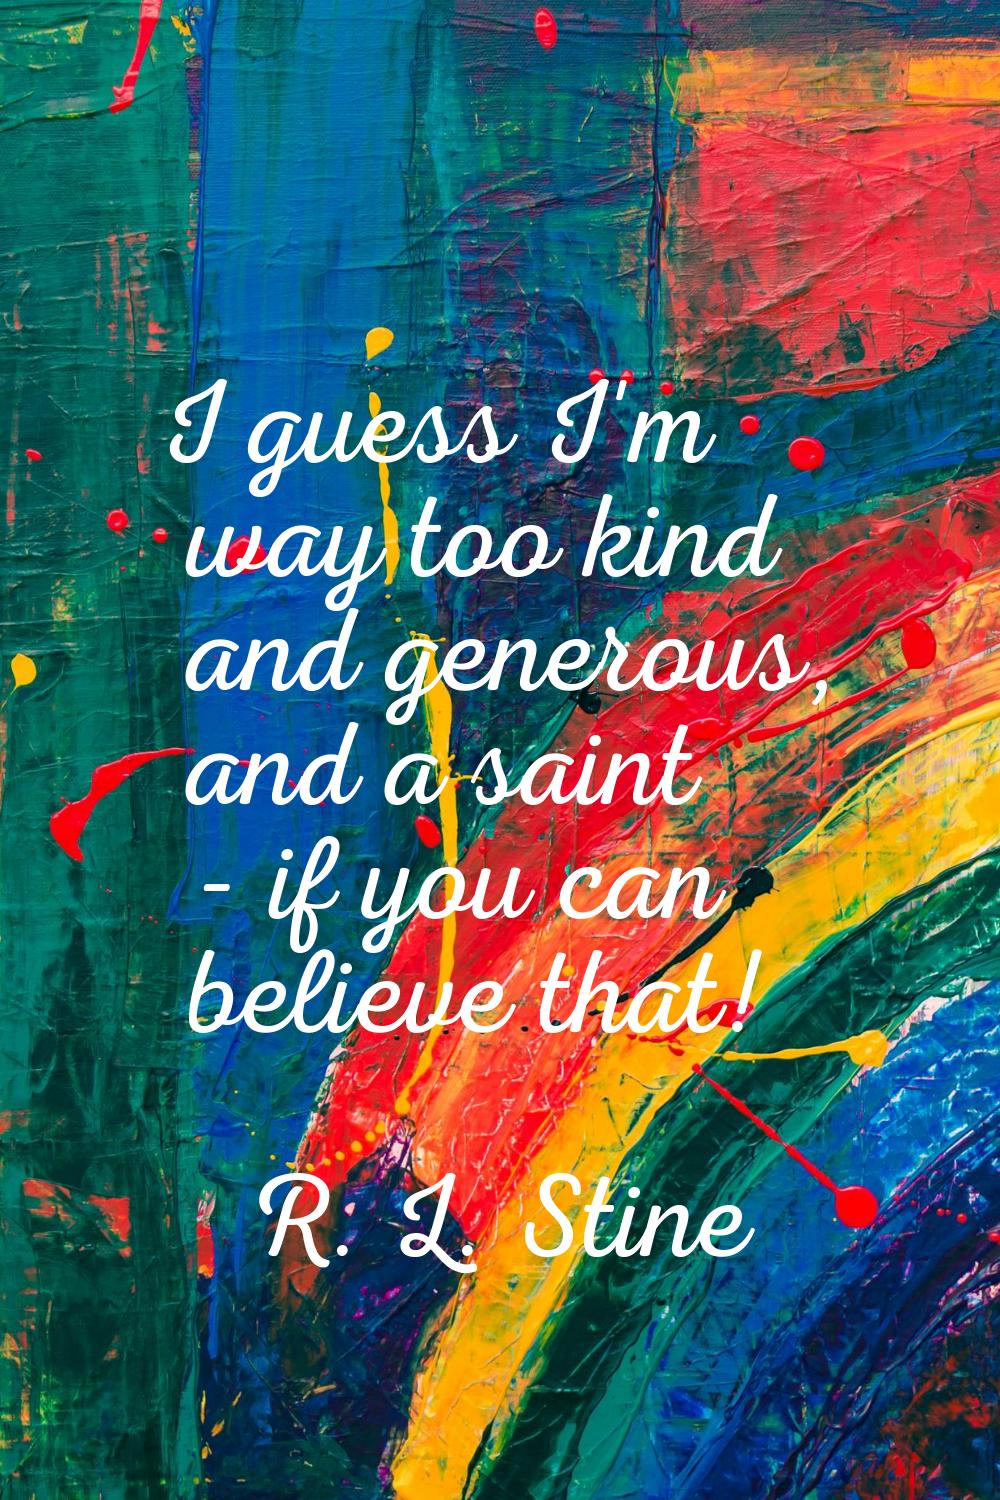 I guess I'm way too kind and generous, and a saint - if you can believe that!